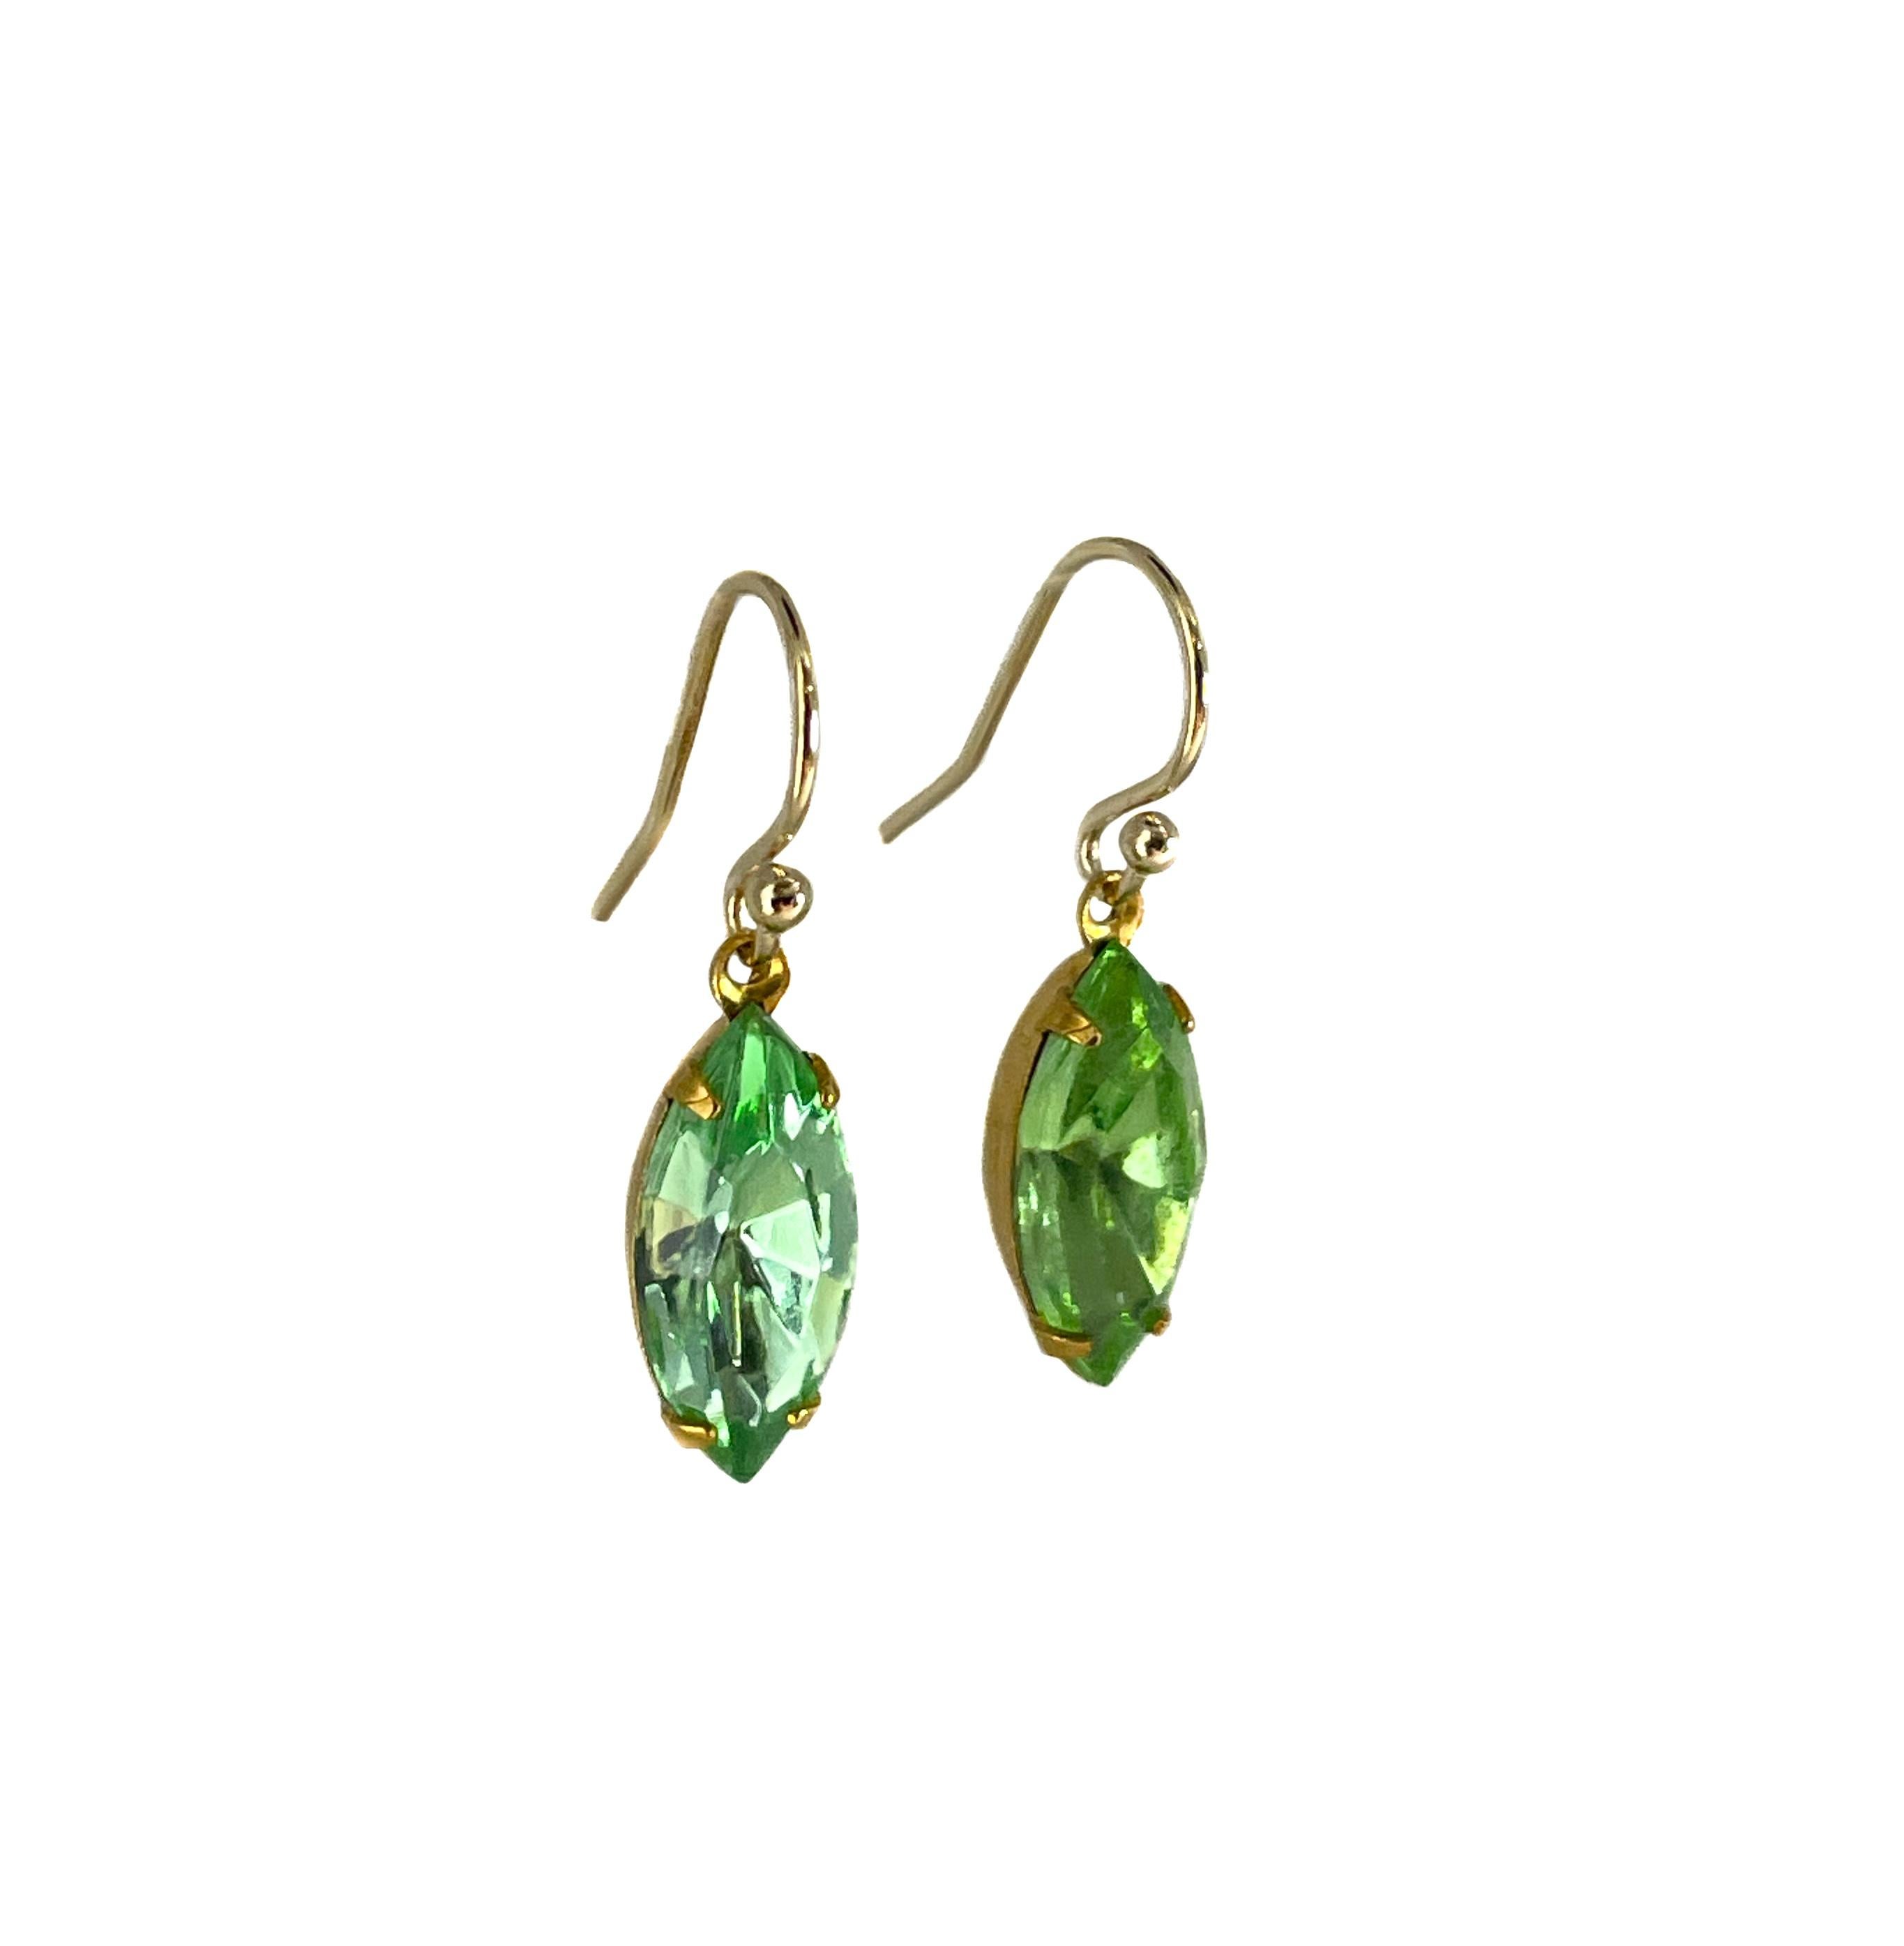 These delicate and elegant drop earrings are made from vintage crystal from Czech Republic. The crystal is made to resemble peridot. 

Each crystal drop measures 15 x 7 mm. They are set in an original brass prong setting. They are hanging from a